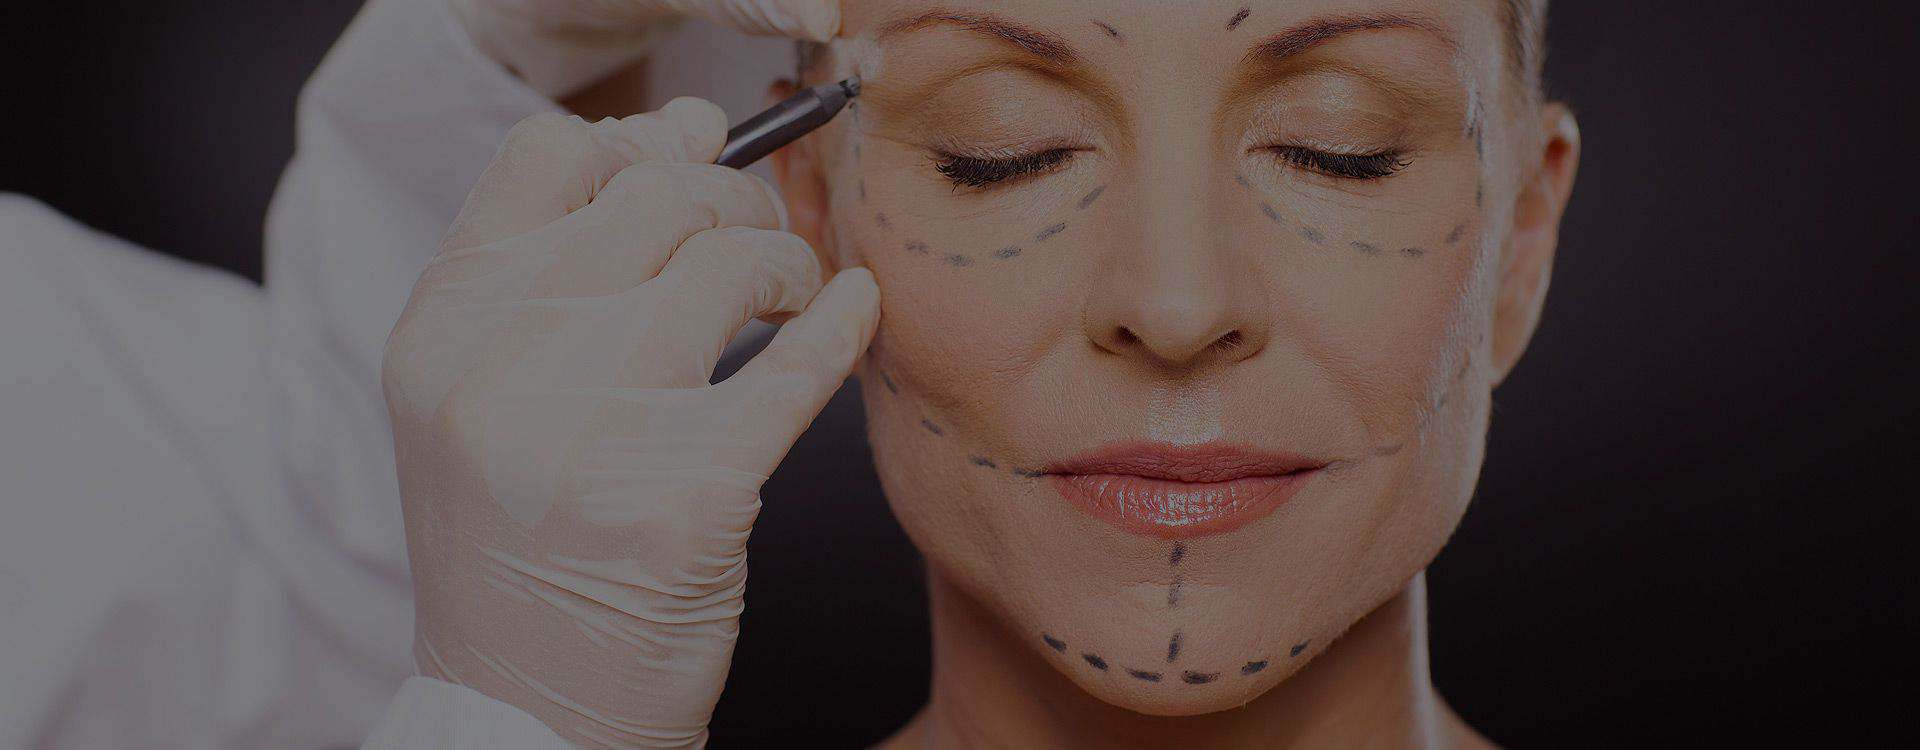 MI body contours & cosmetics cosmetic surgery clinic offers free consultation